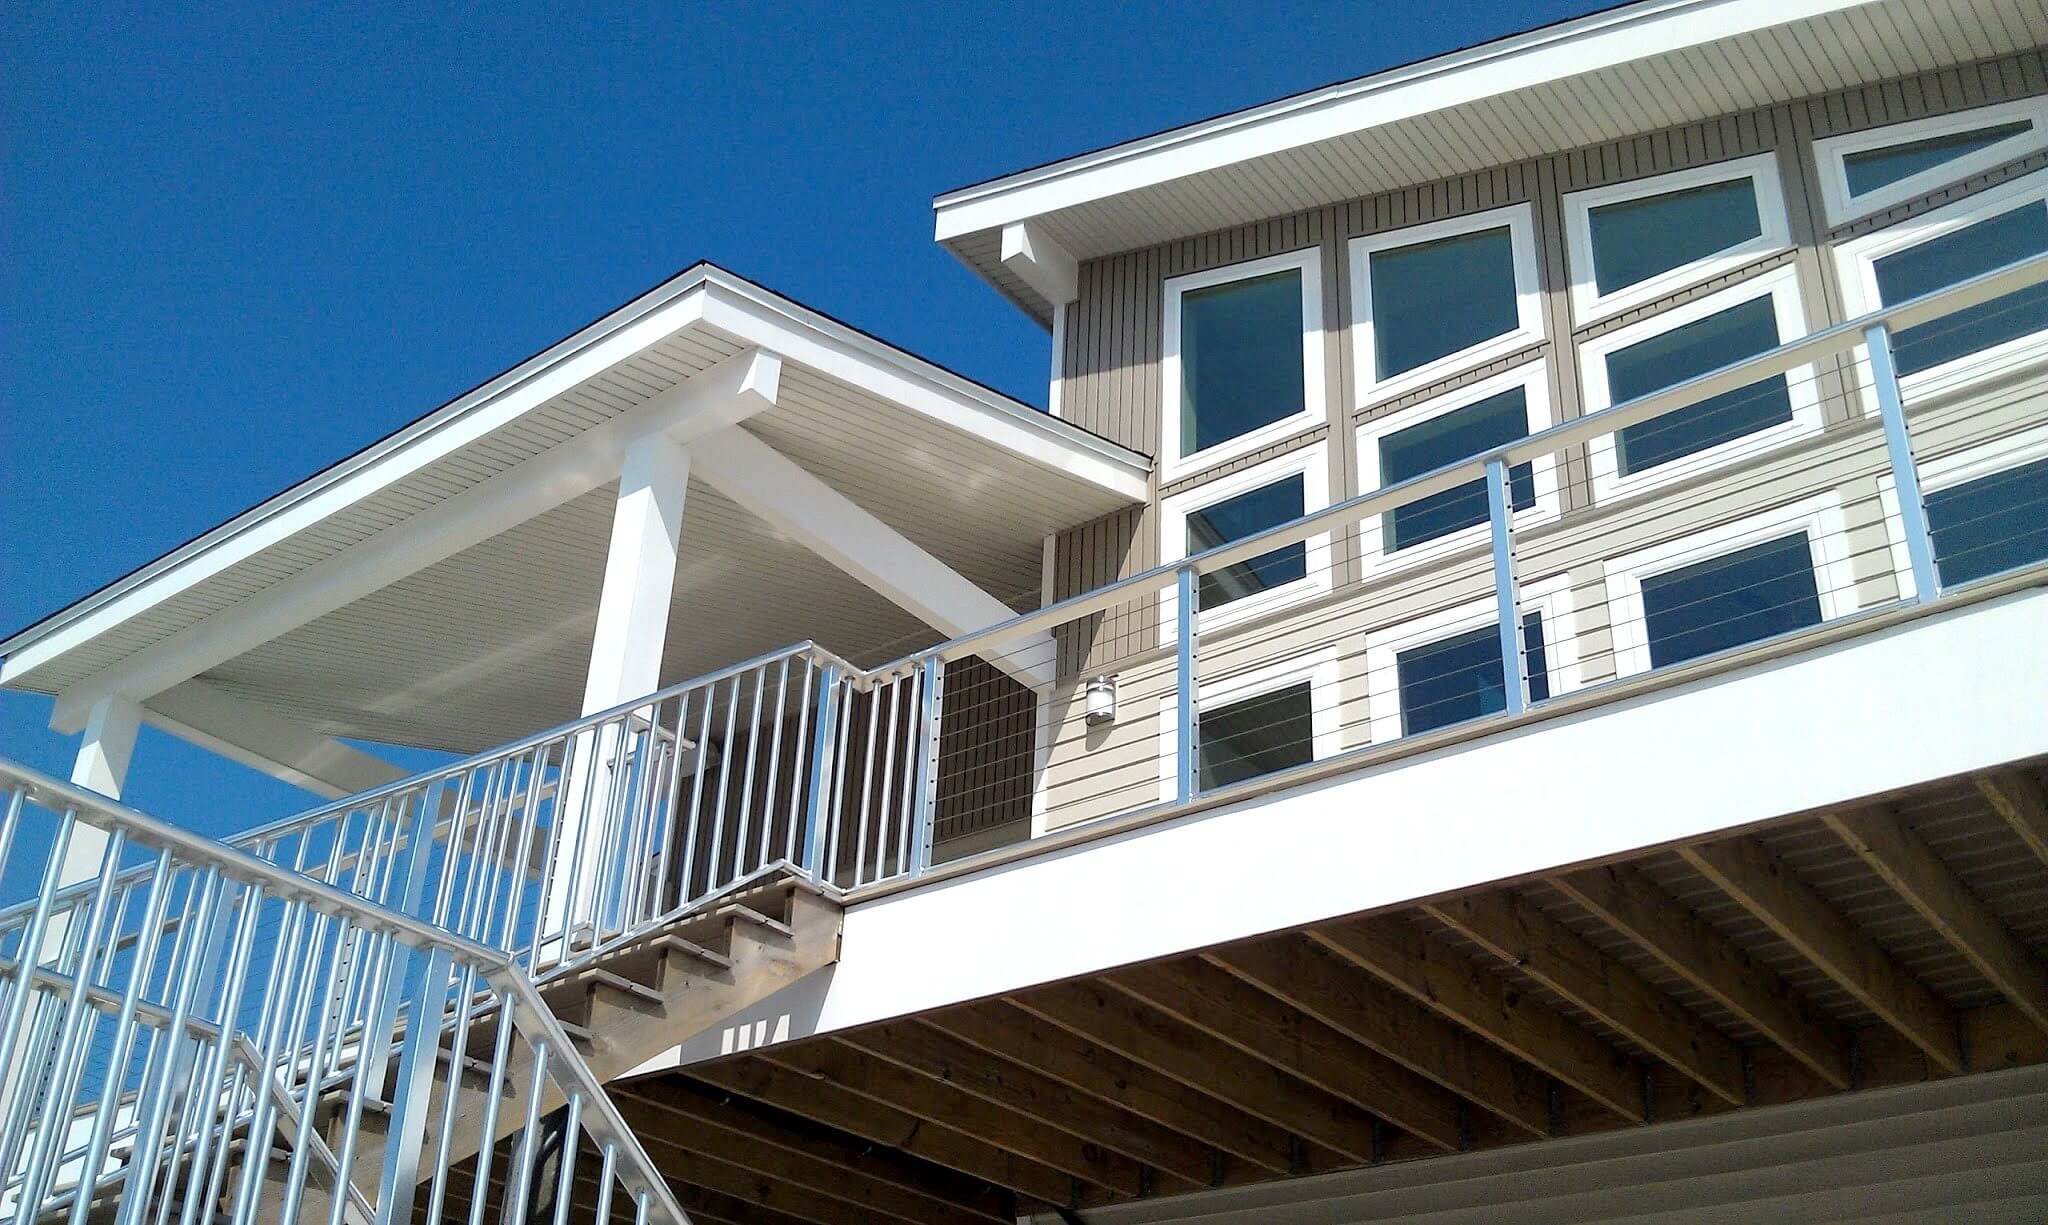 Grand Lagoon New Construction wrap around porch and railings by Highpointe DBR, LLC